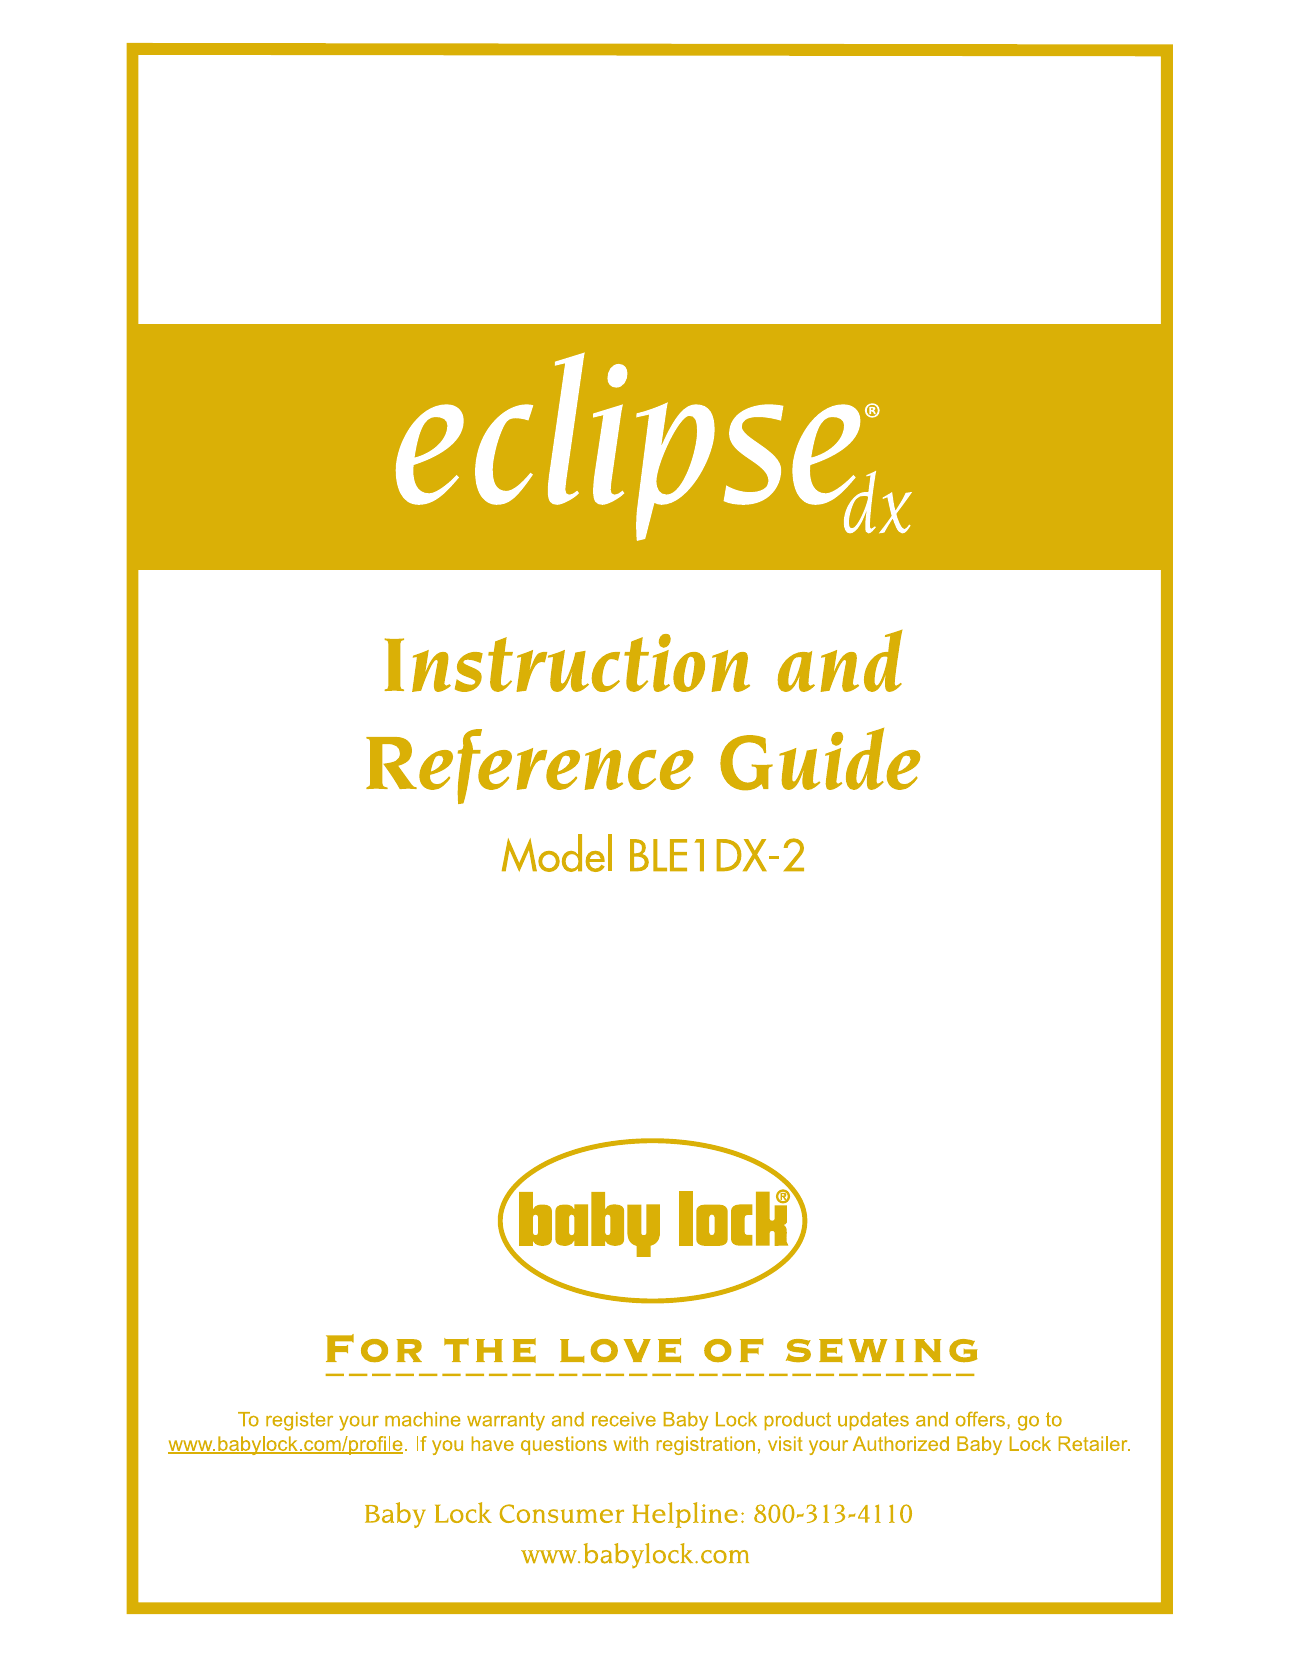 Eclipse Baby Lock DX, BLE1DX-2 instruction manual Preview image 1